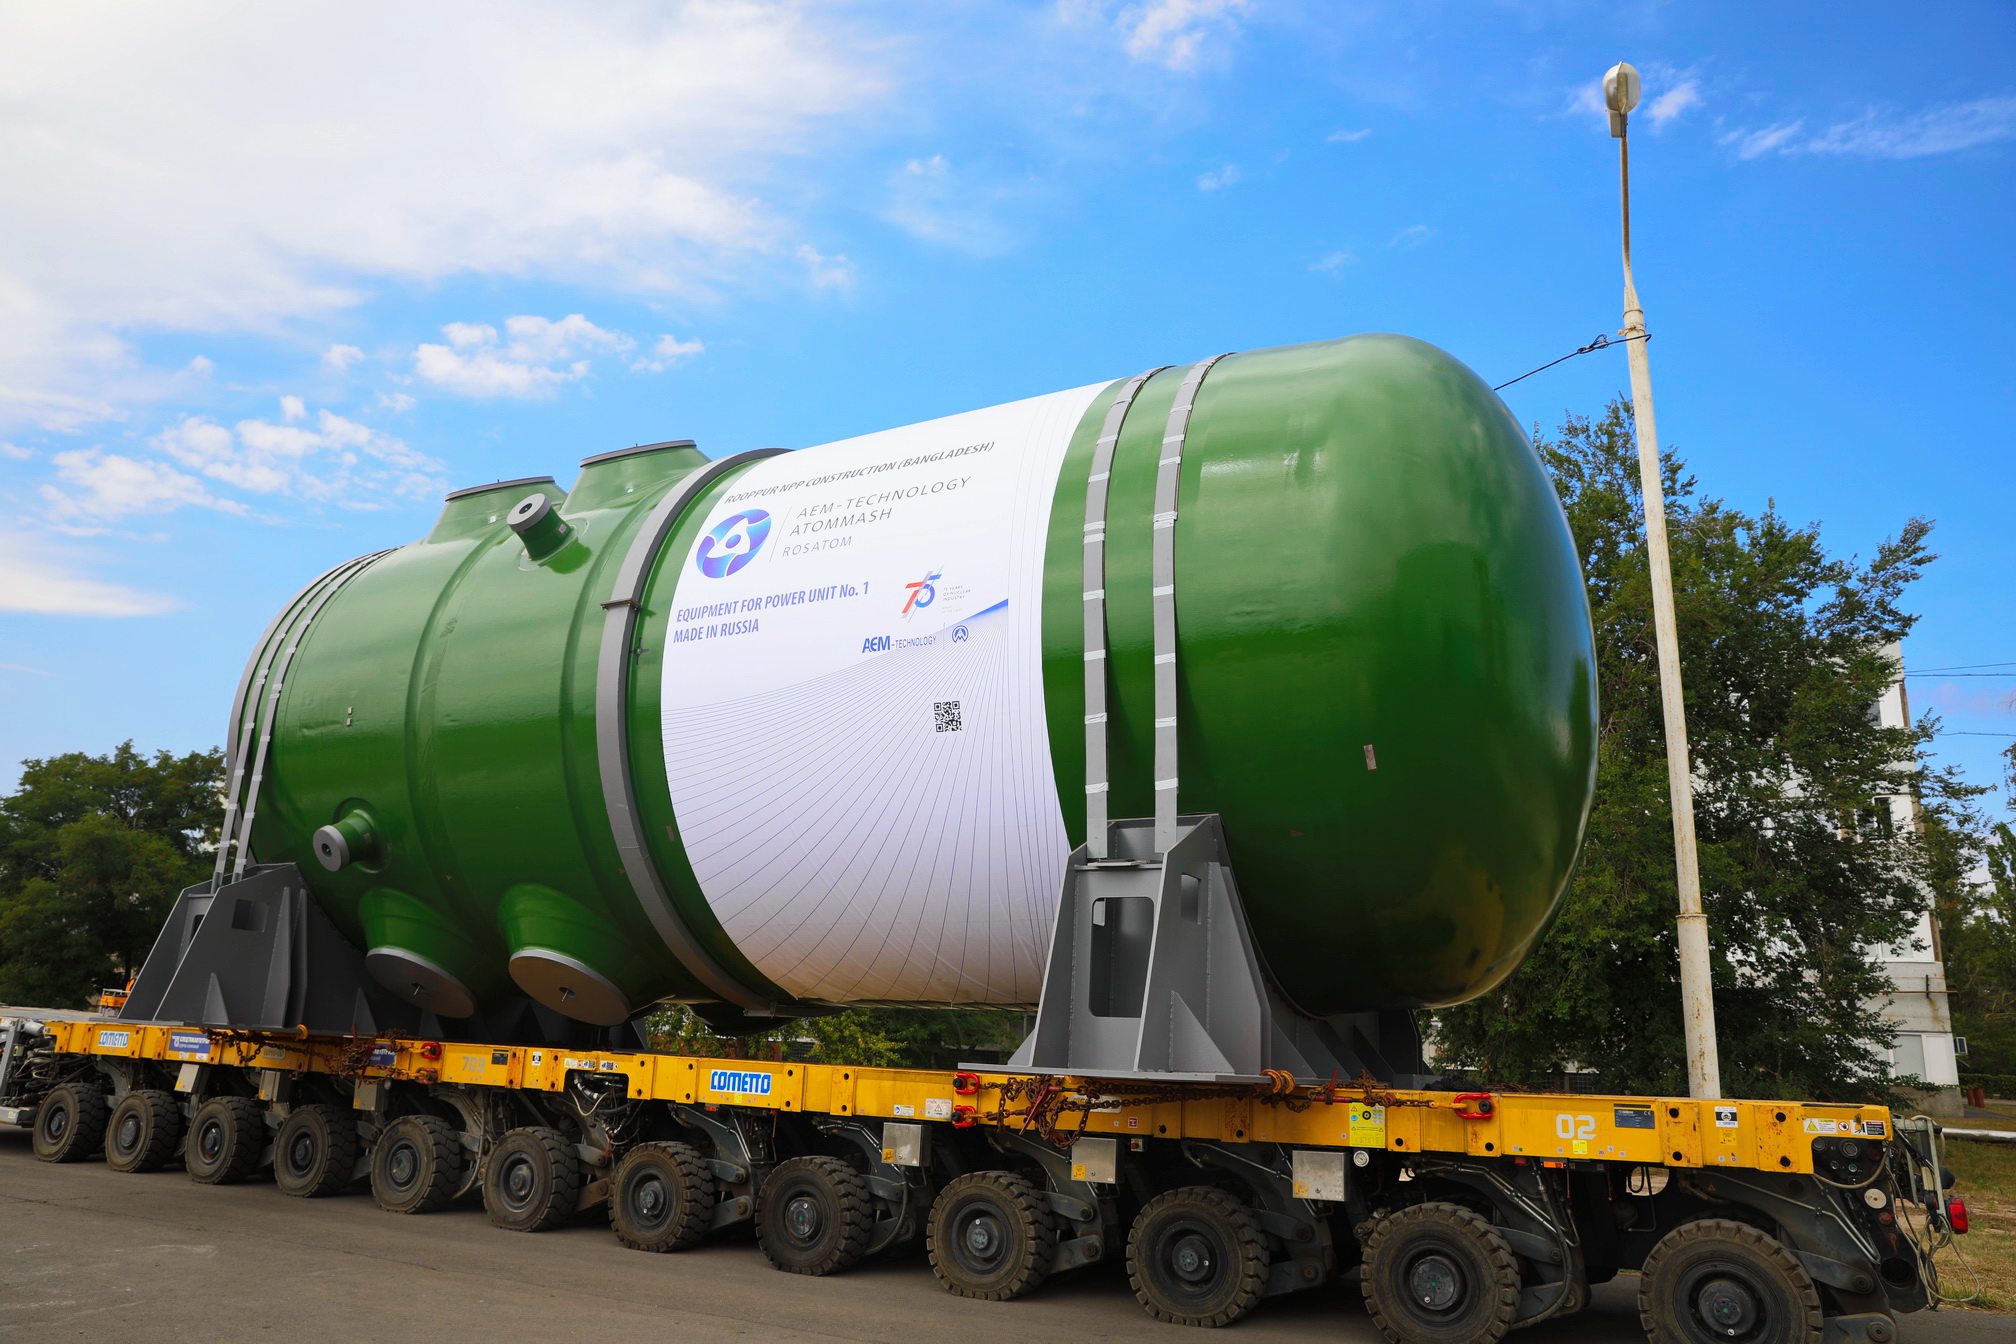 Atommash Shipped The First Reactor Vessel and Steam Generator For The First Unit of The First NPP in The History of Republic of Bangladesh